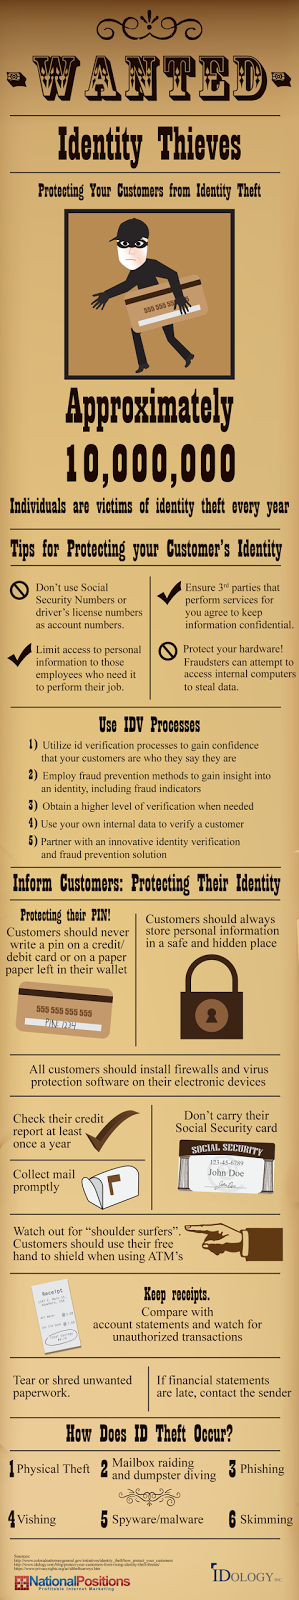 Protect Your Customers' Identifying Information